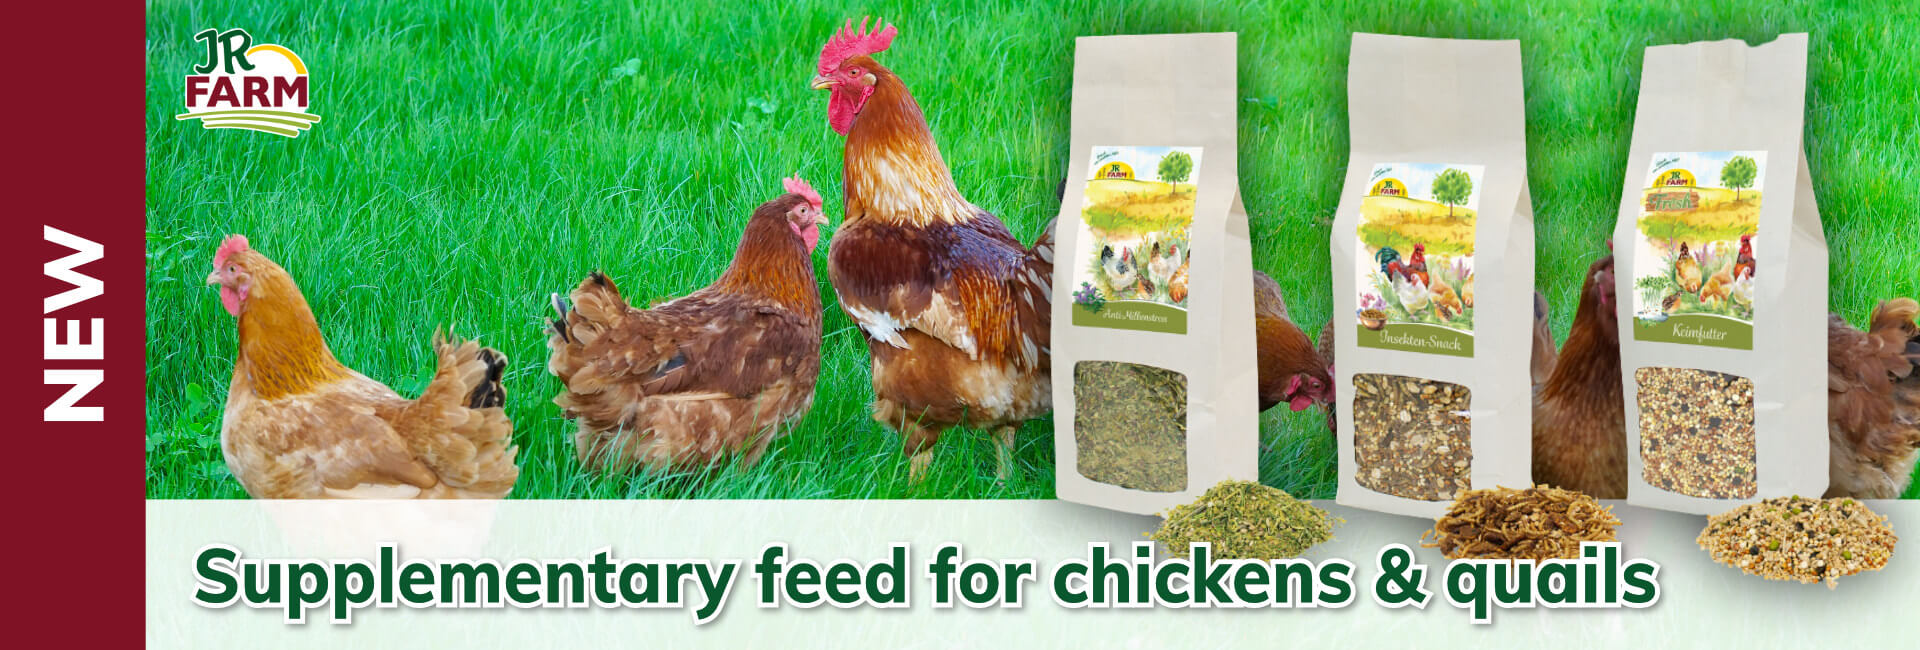 JR Farm Supplementary feed for chickens & quails